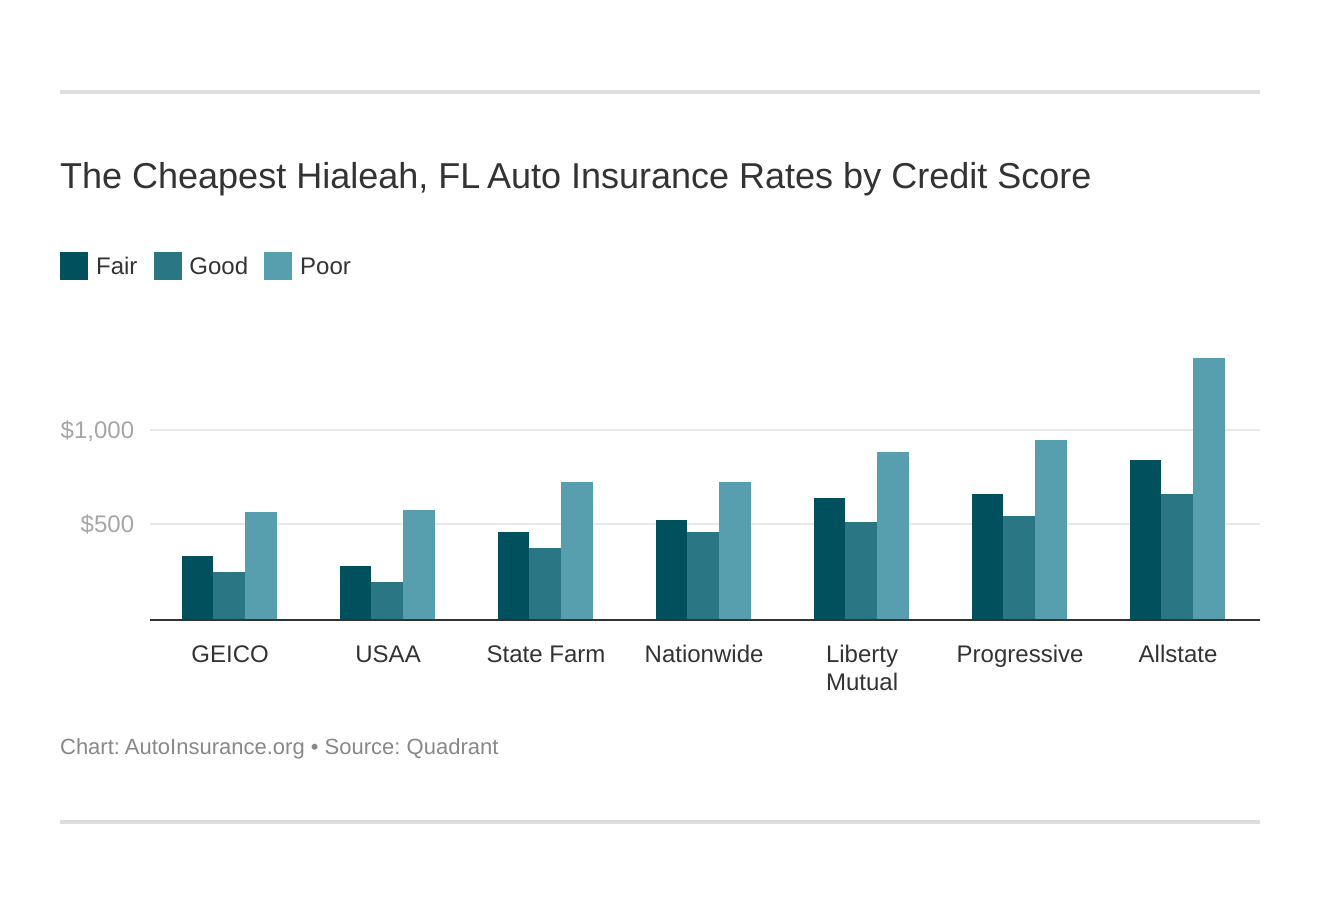 The Cheapest Hialeah, FL Auto Insurance Rates by Credit Score